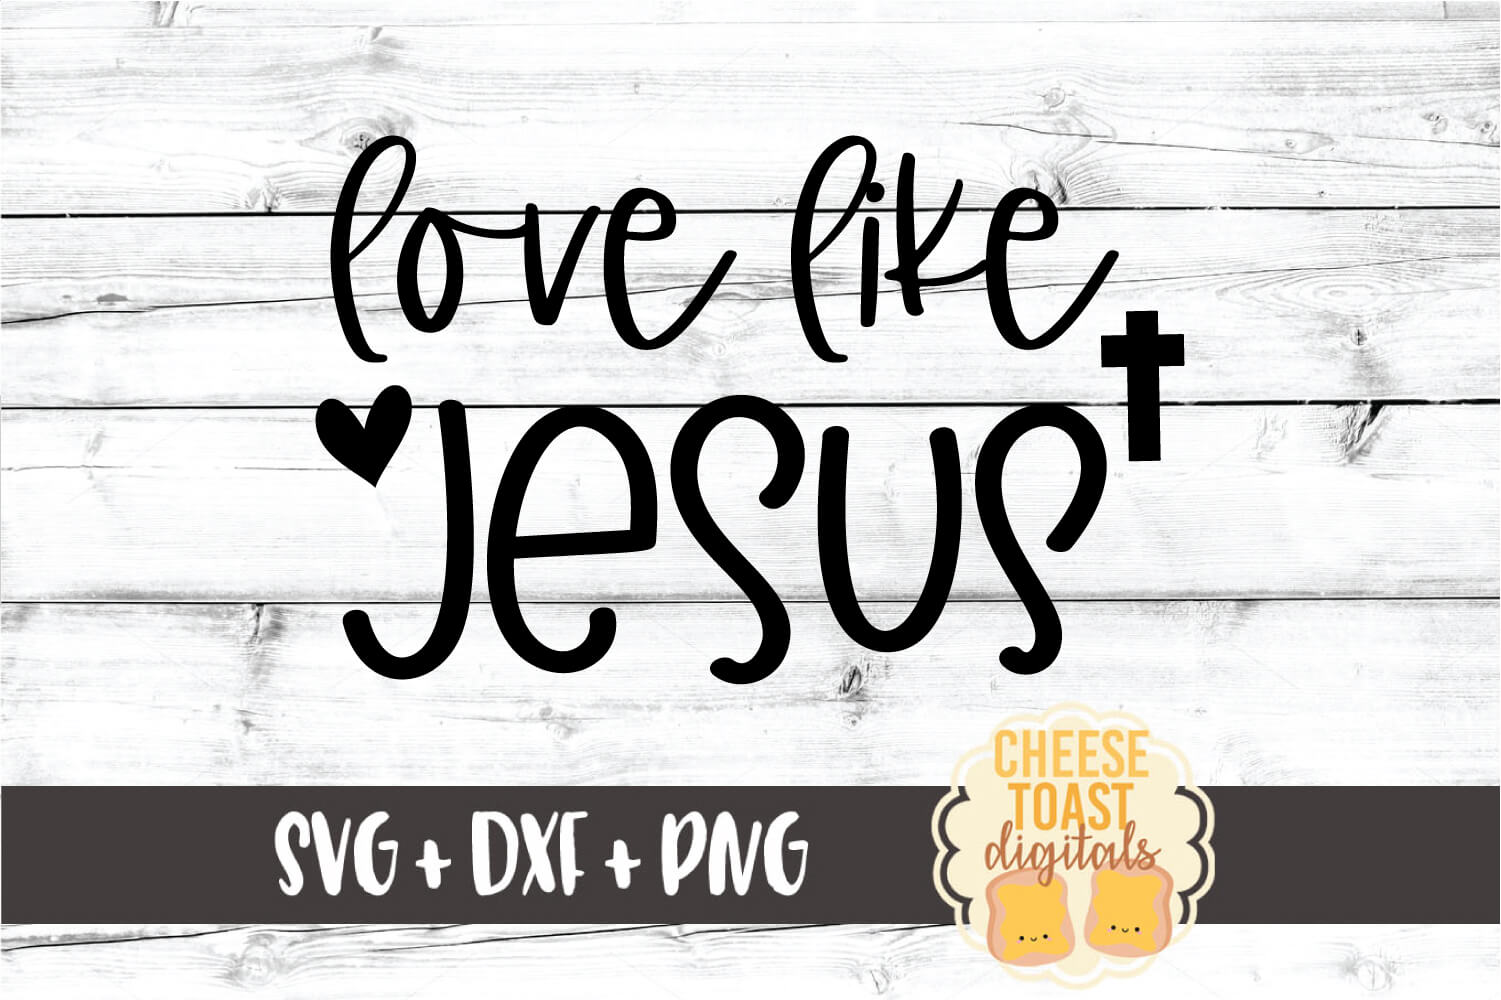 Download Love Like Jesus - Religious Easter SVG PNG DXF Cut Files